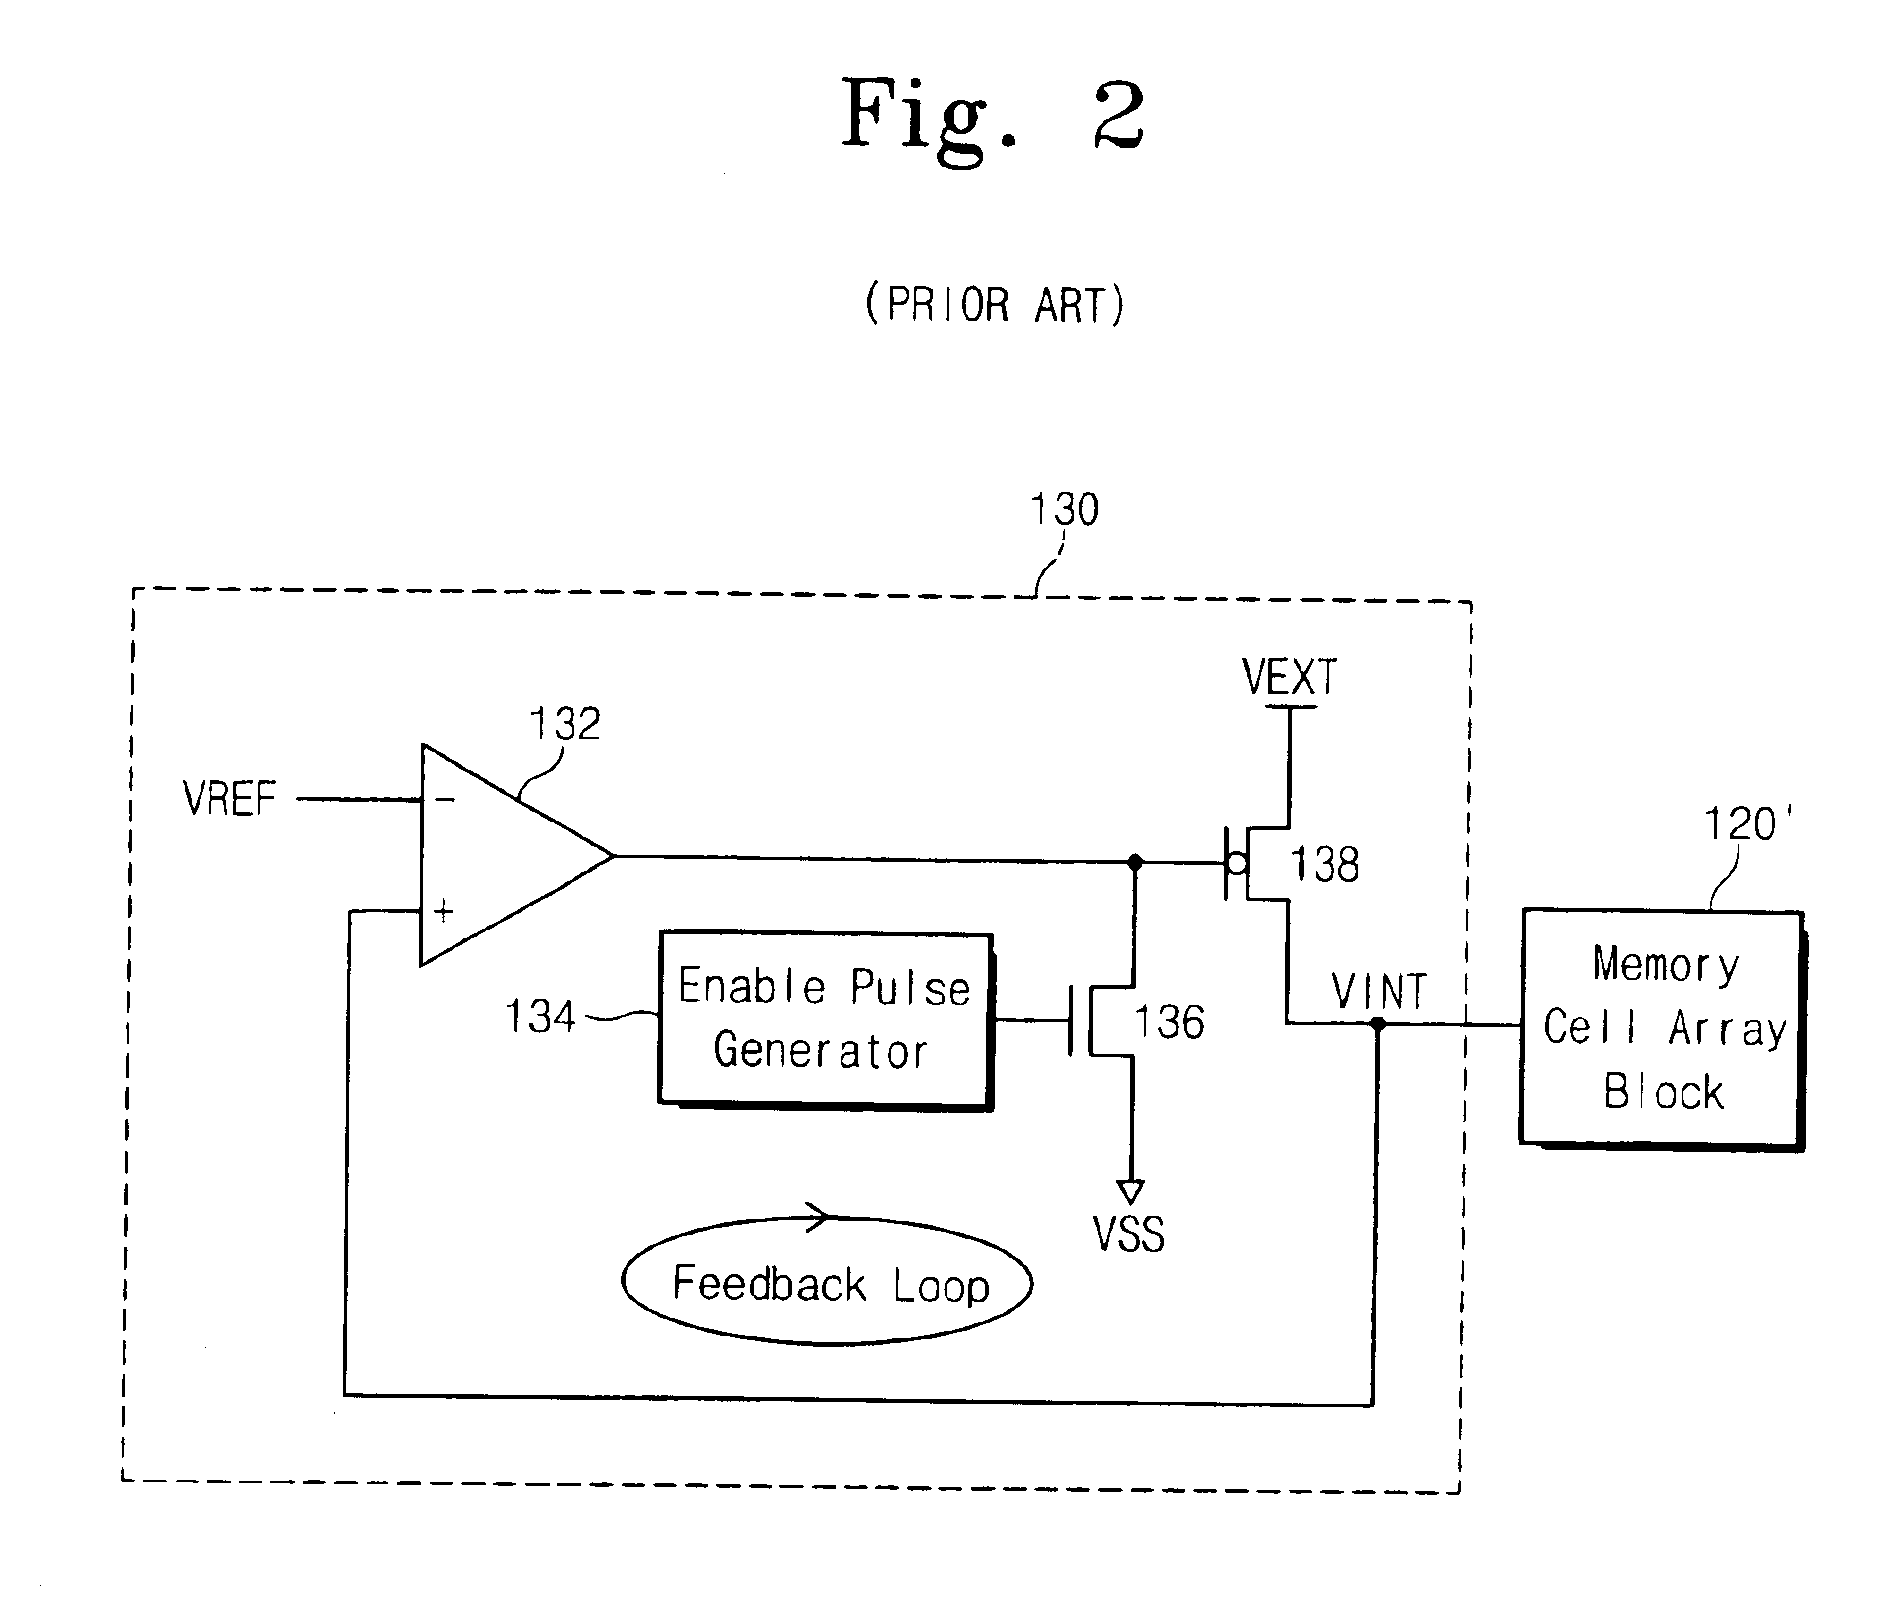 Semiconductor memory device having an internal voltage generation circuit for selectively generating an internal voltage according to an external voltage level